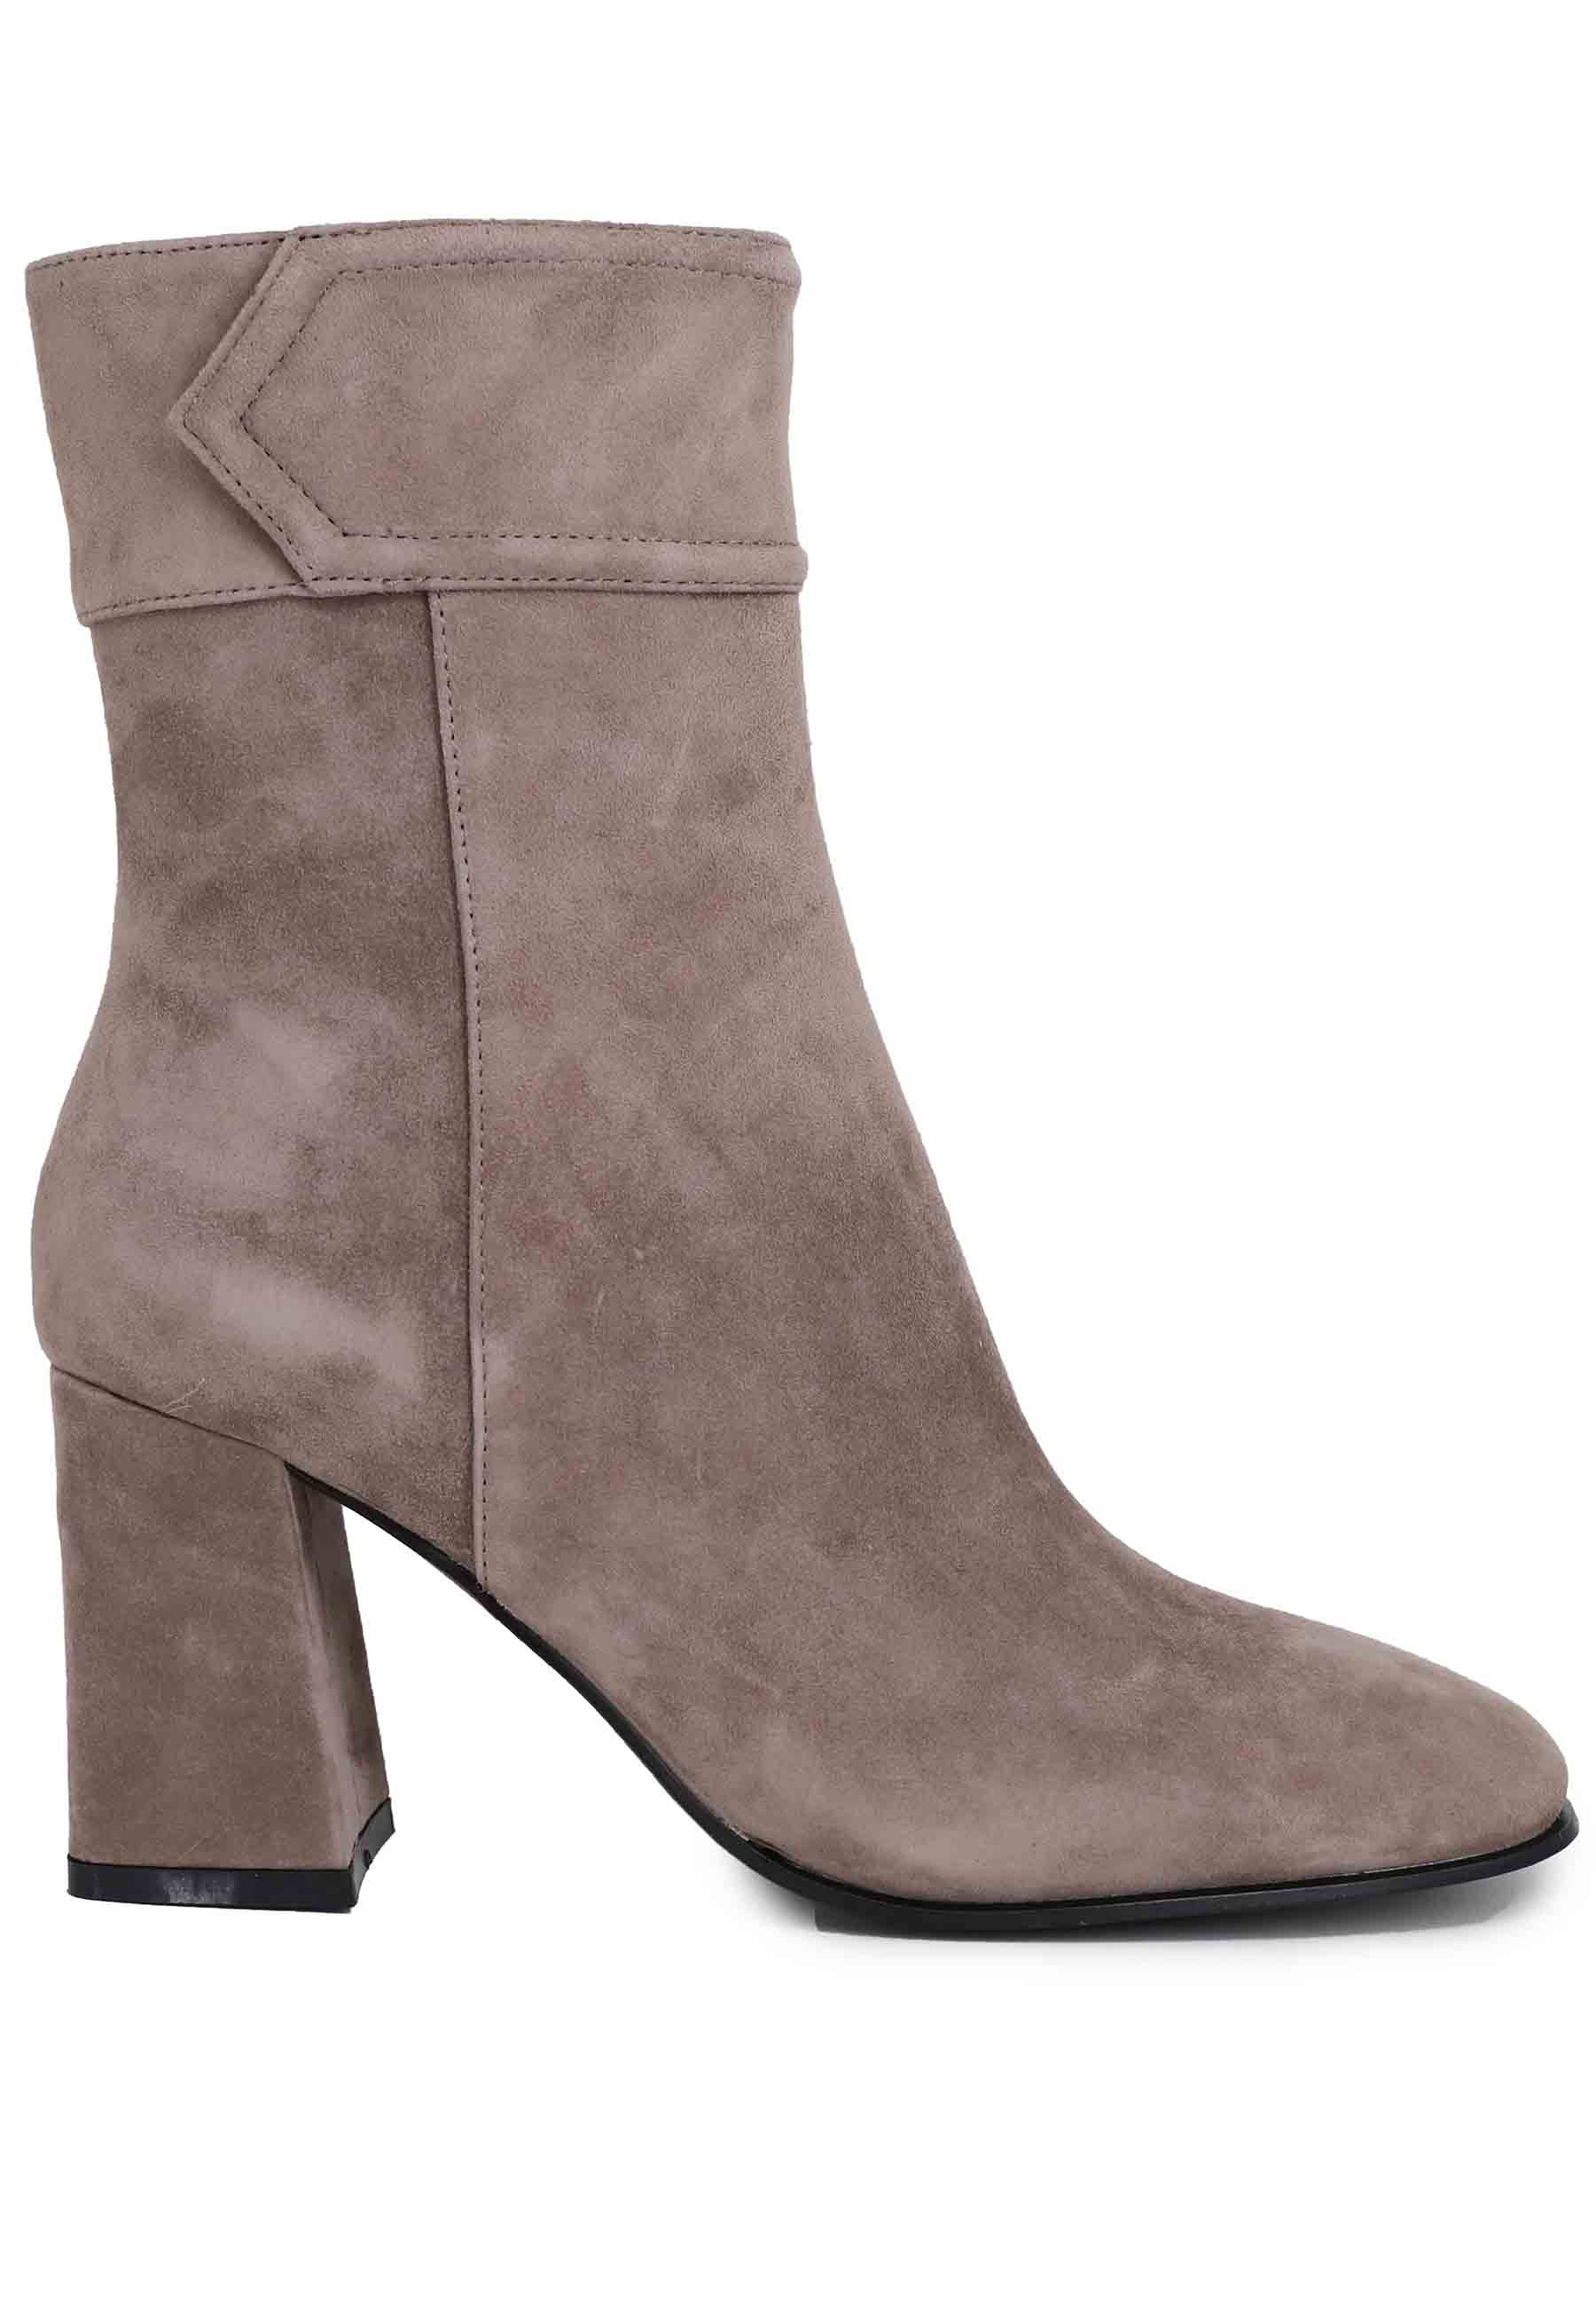 Chisinau women's ankle boots in gray suede with high heel and square toe